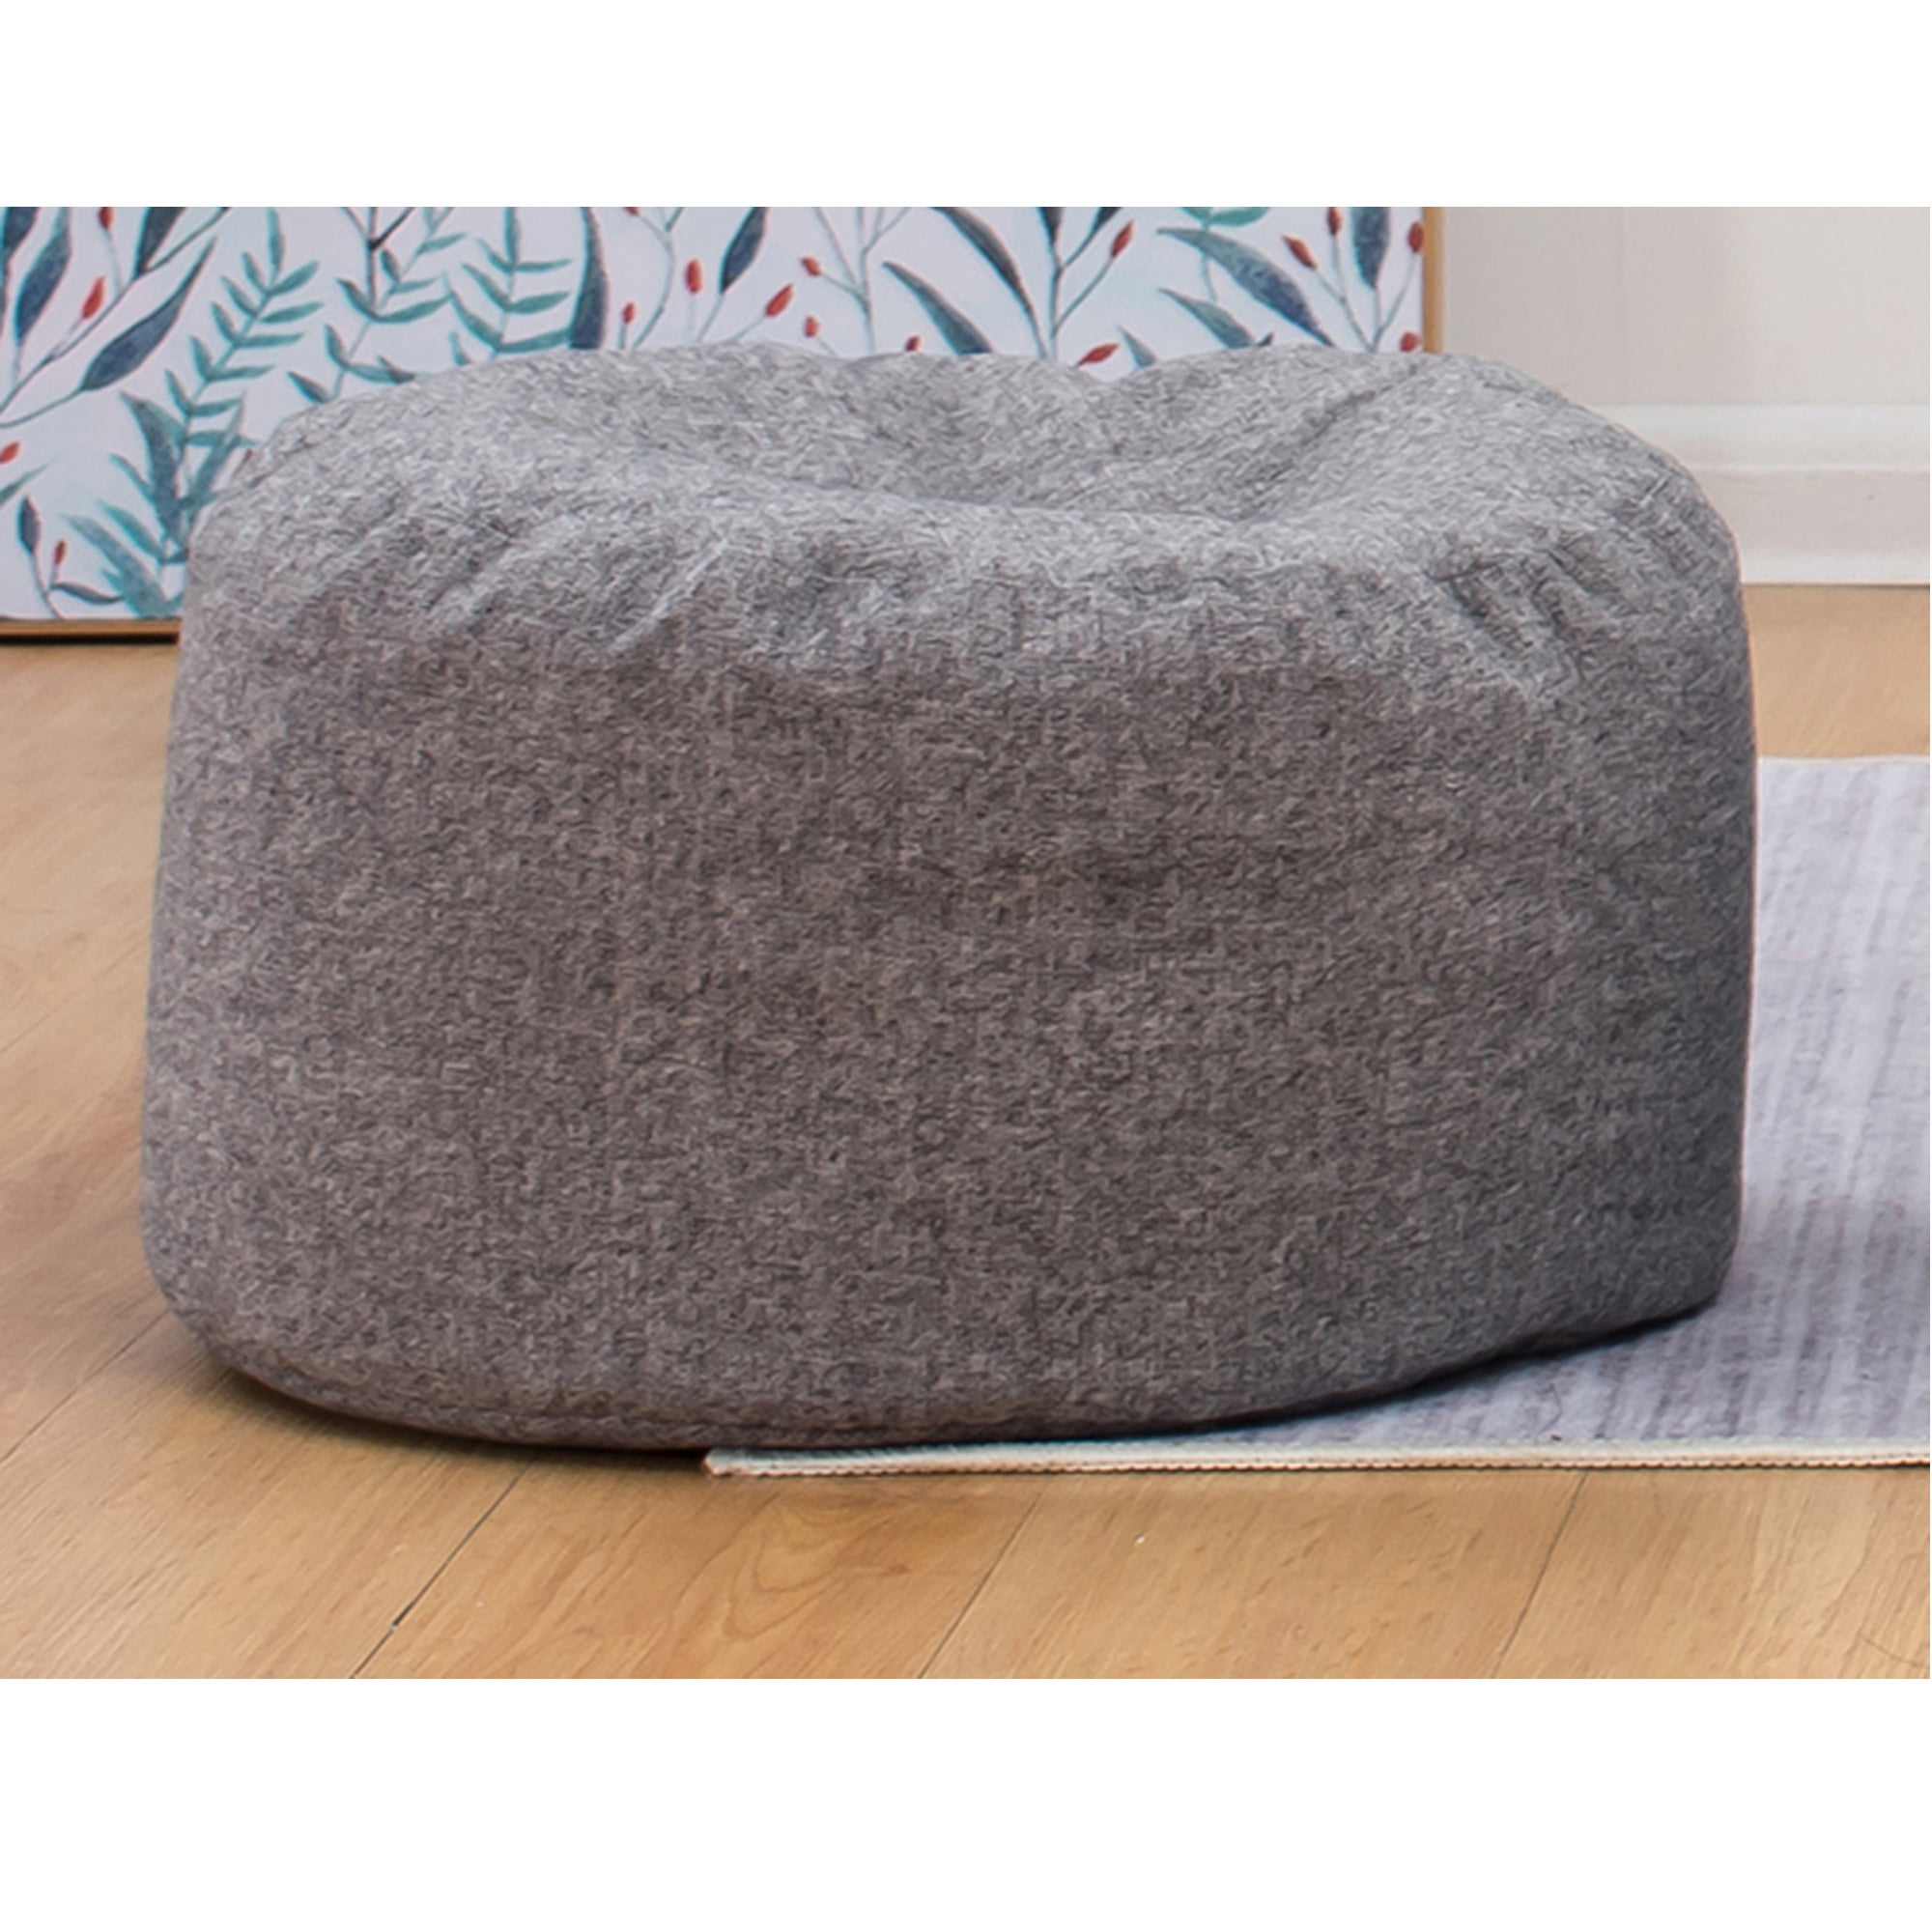 Colors Bean Bag Cover Ottoman Footstool Round Stool Chair Cover without Filling 